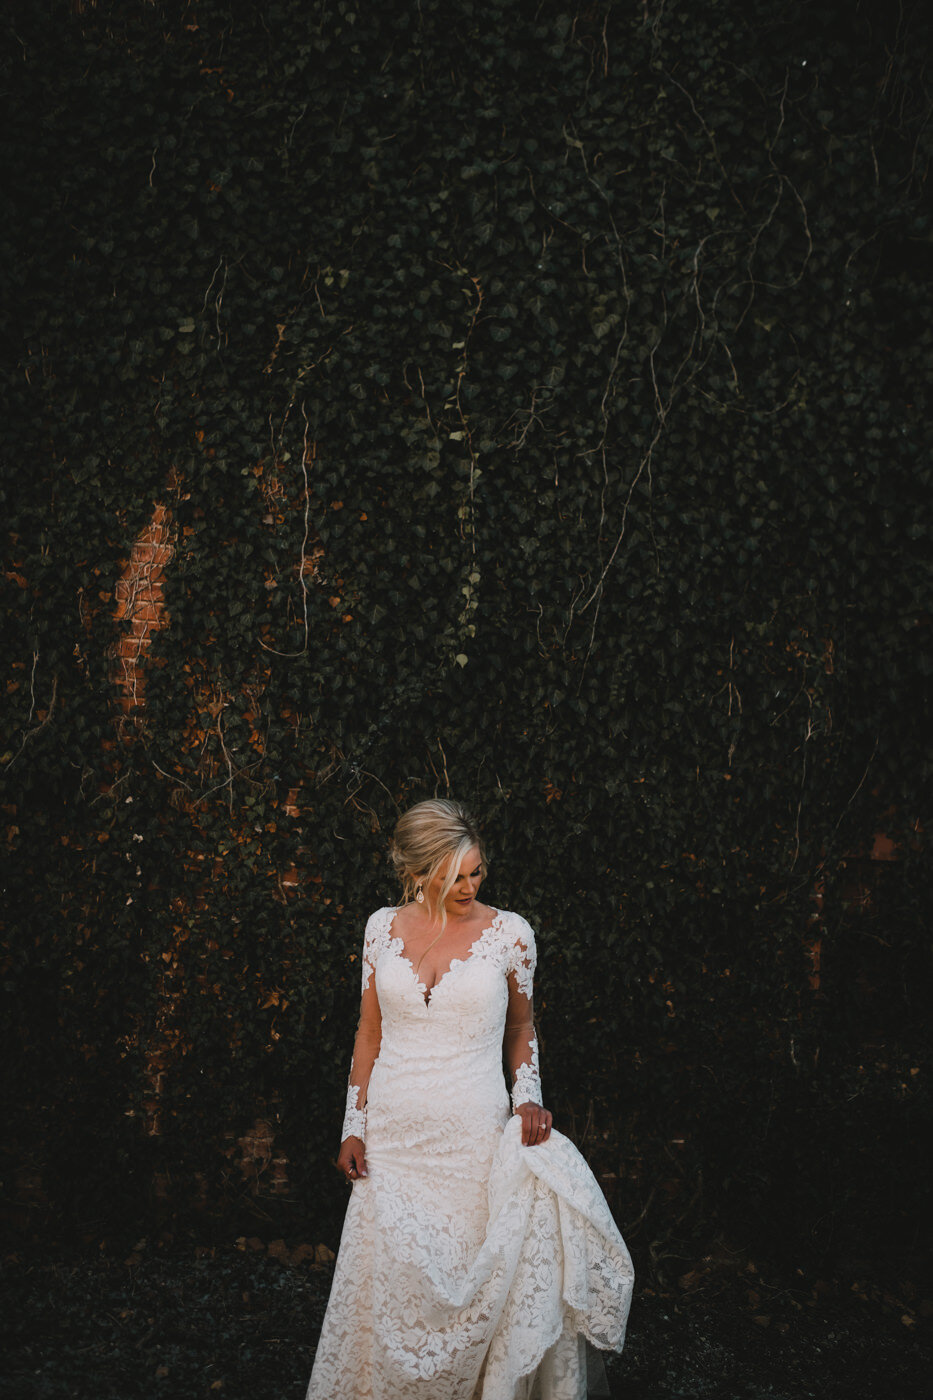 Kate + Tyler. A perfectly styled wedding day